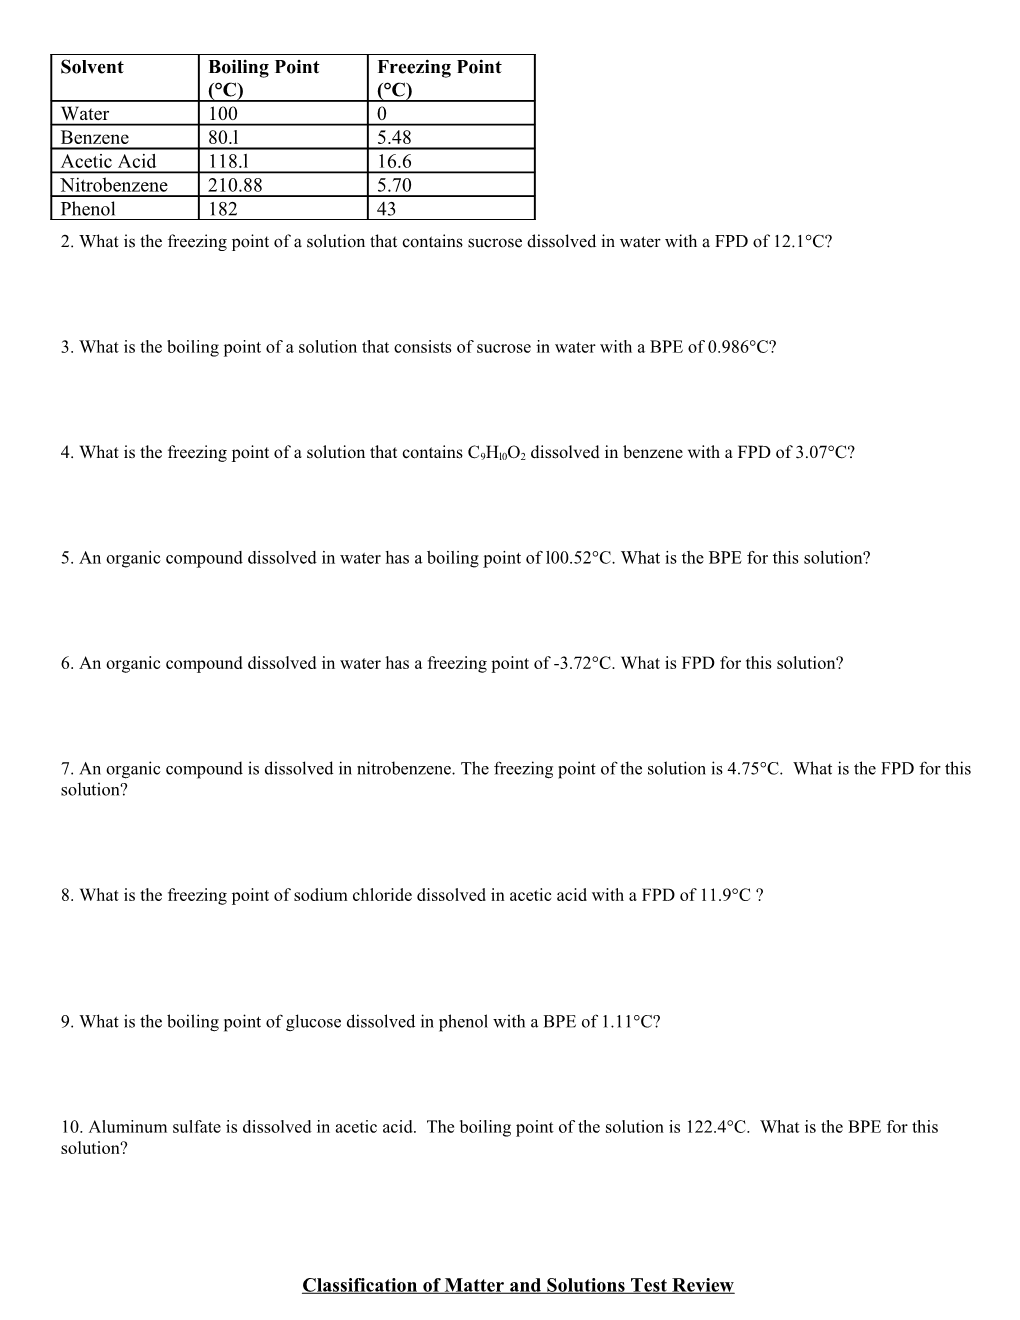 Solutions Worksheet #1 (Solutions, Electrolyte S, and Classification of Matter)